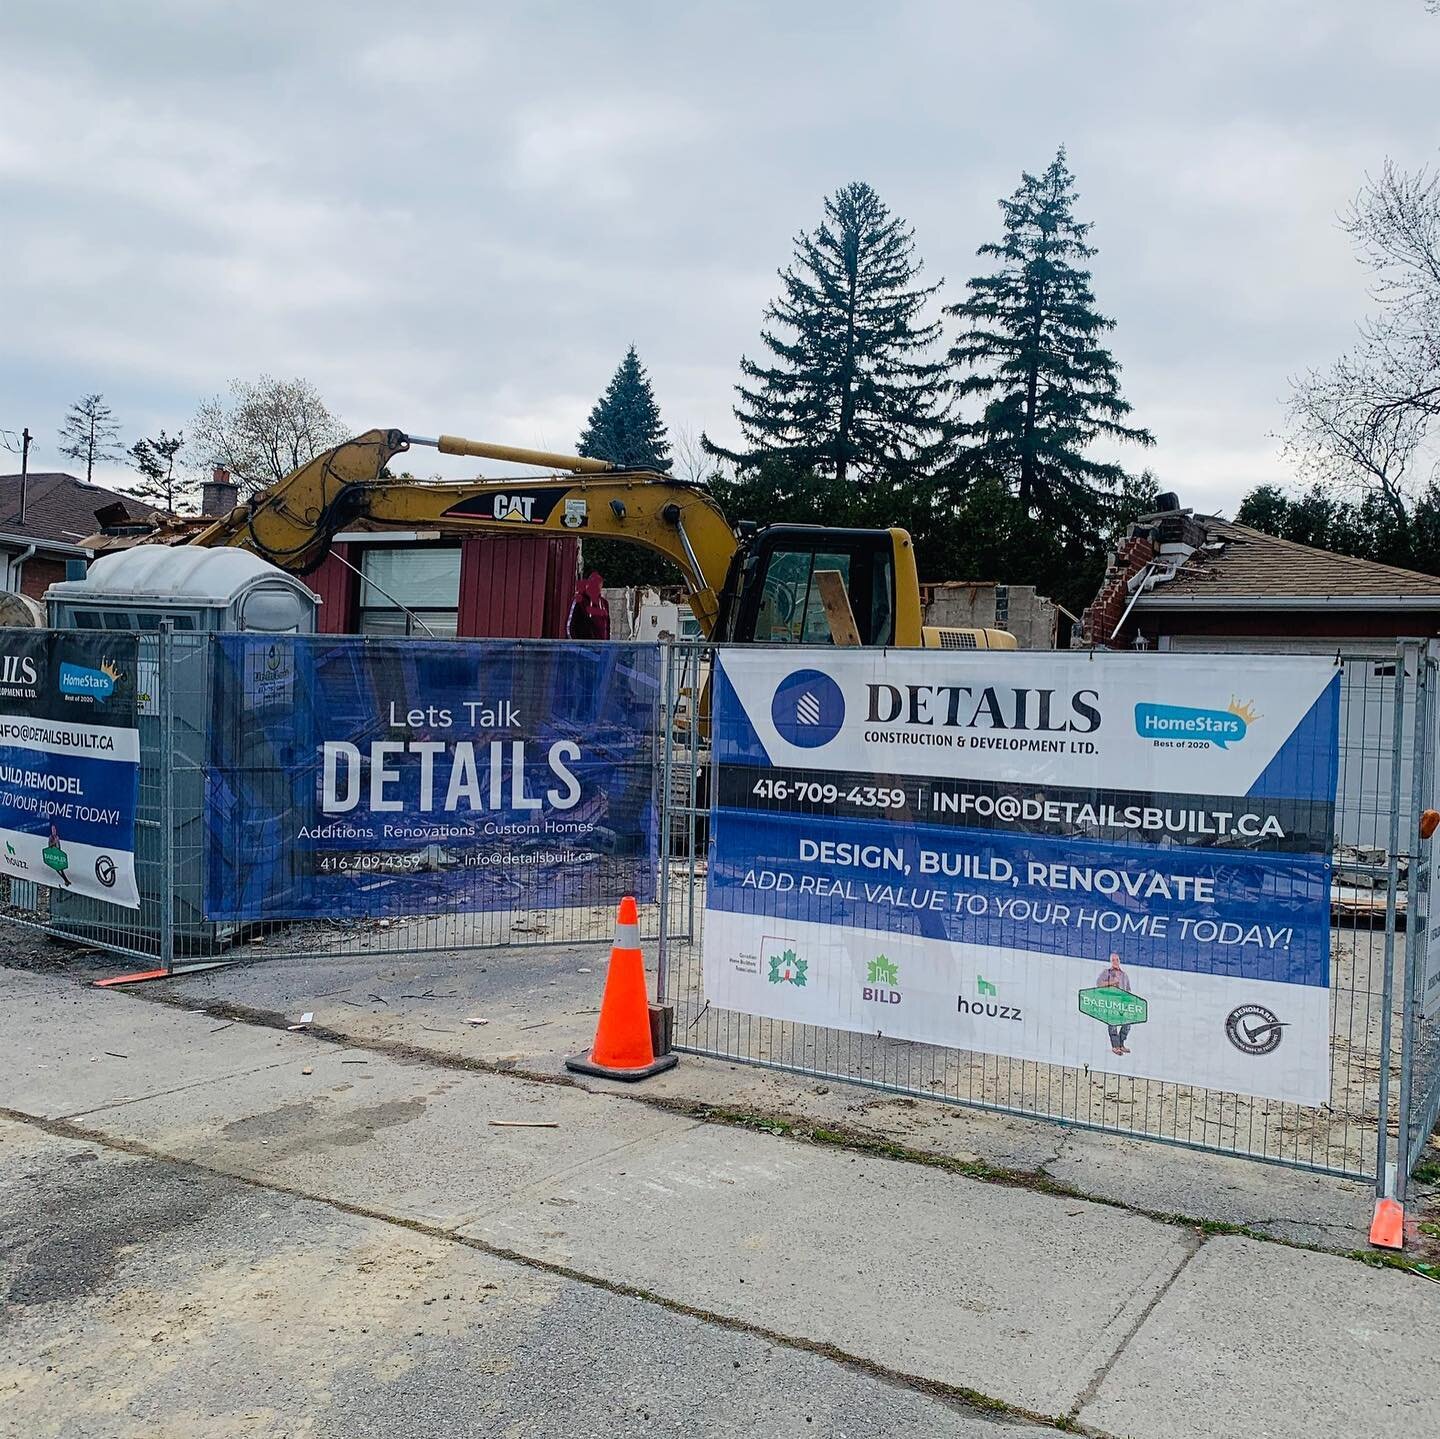 Bye, bye bungalow!💪 Major progress at our #Otonabee project. Making way for a new monster custom home in North York over 7,500 square feet of living space. Our award winning team strives to create timeless architecture, inspiring spaces, and the hig